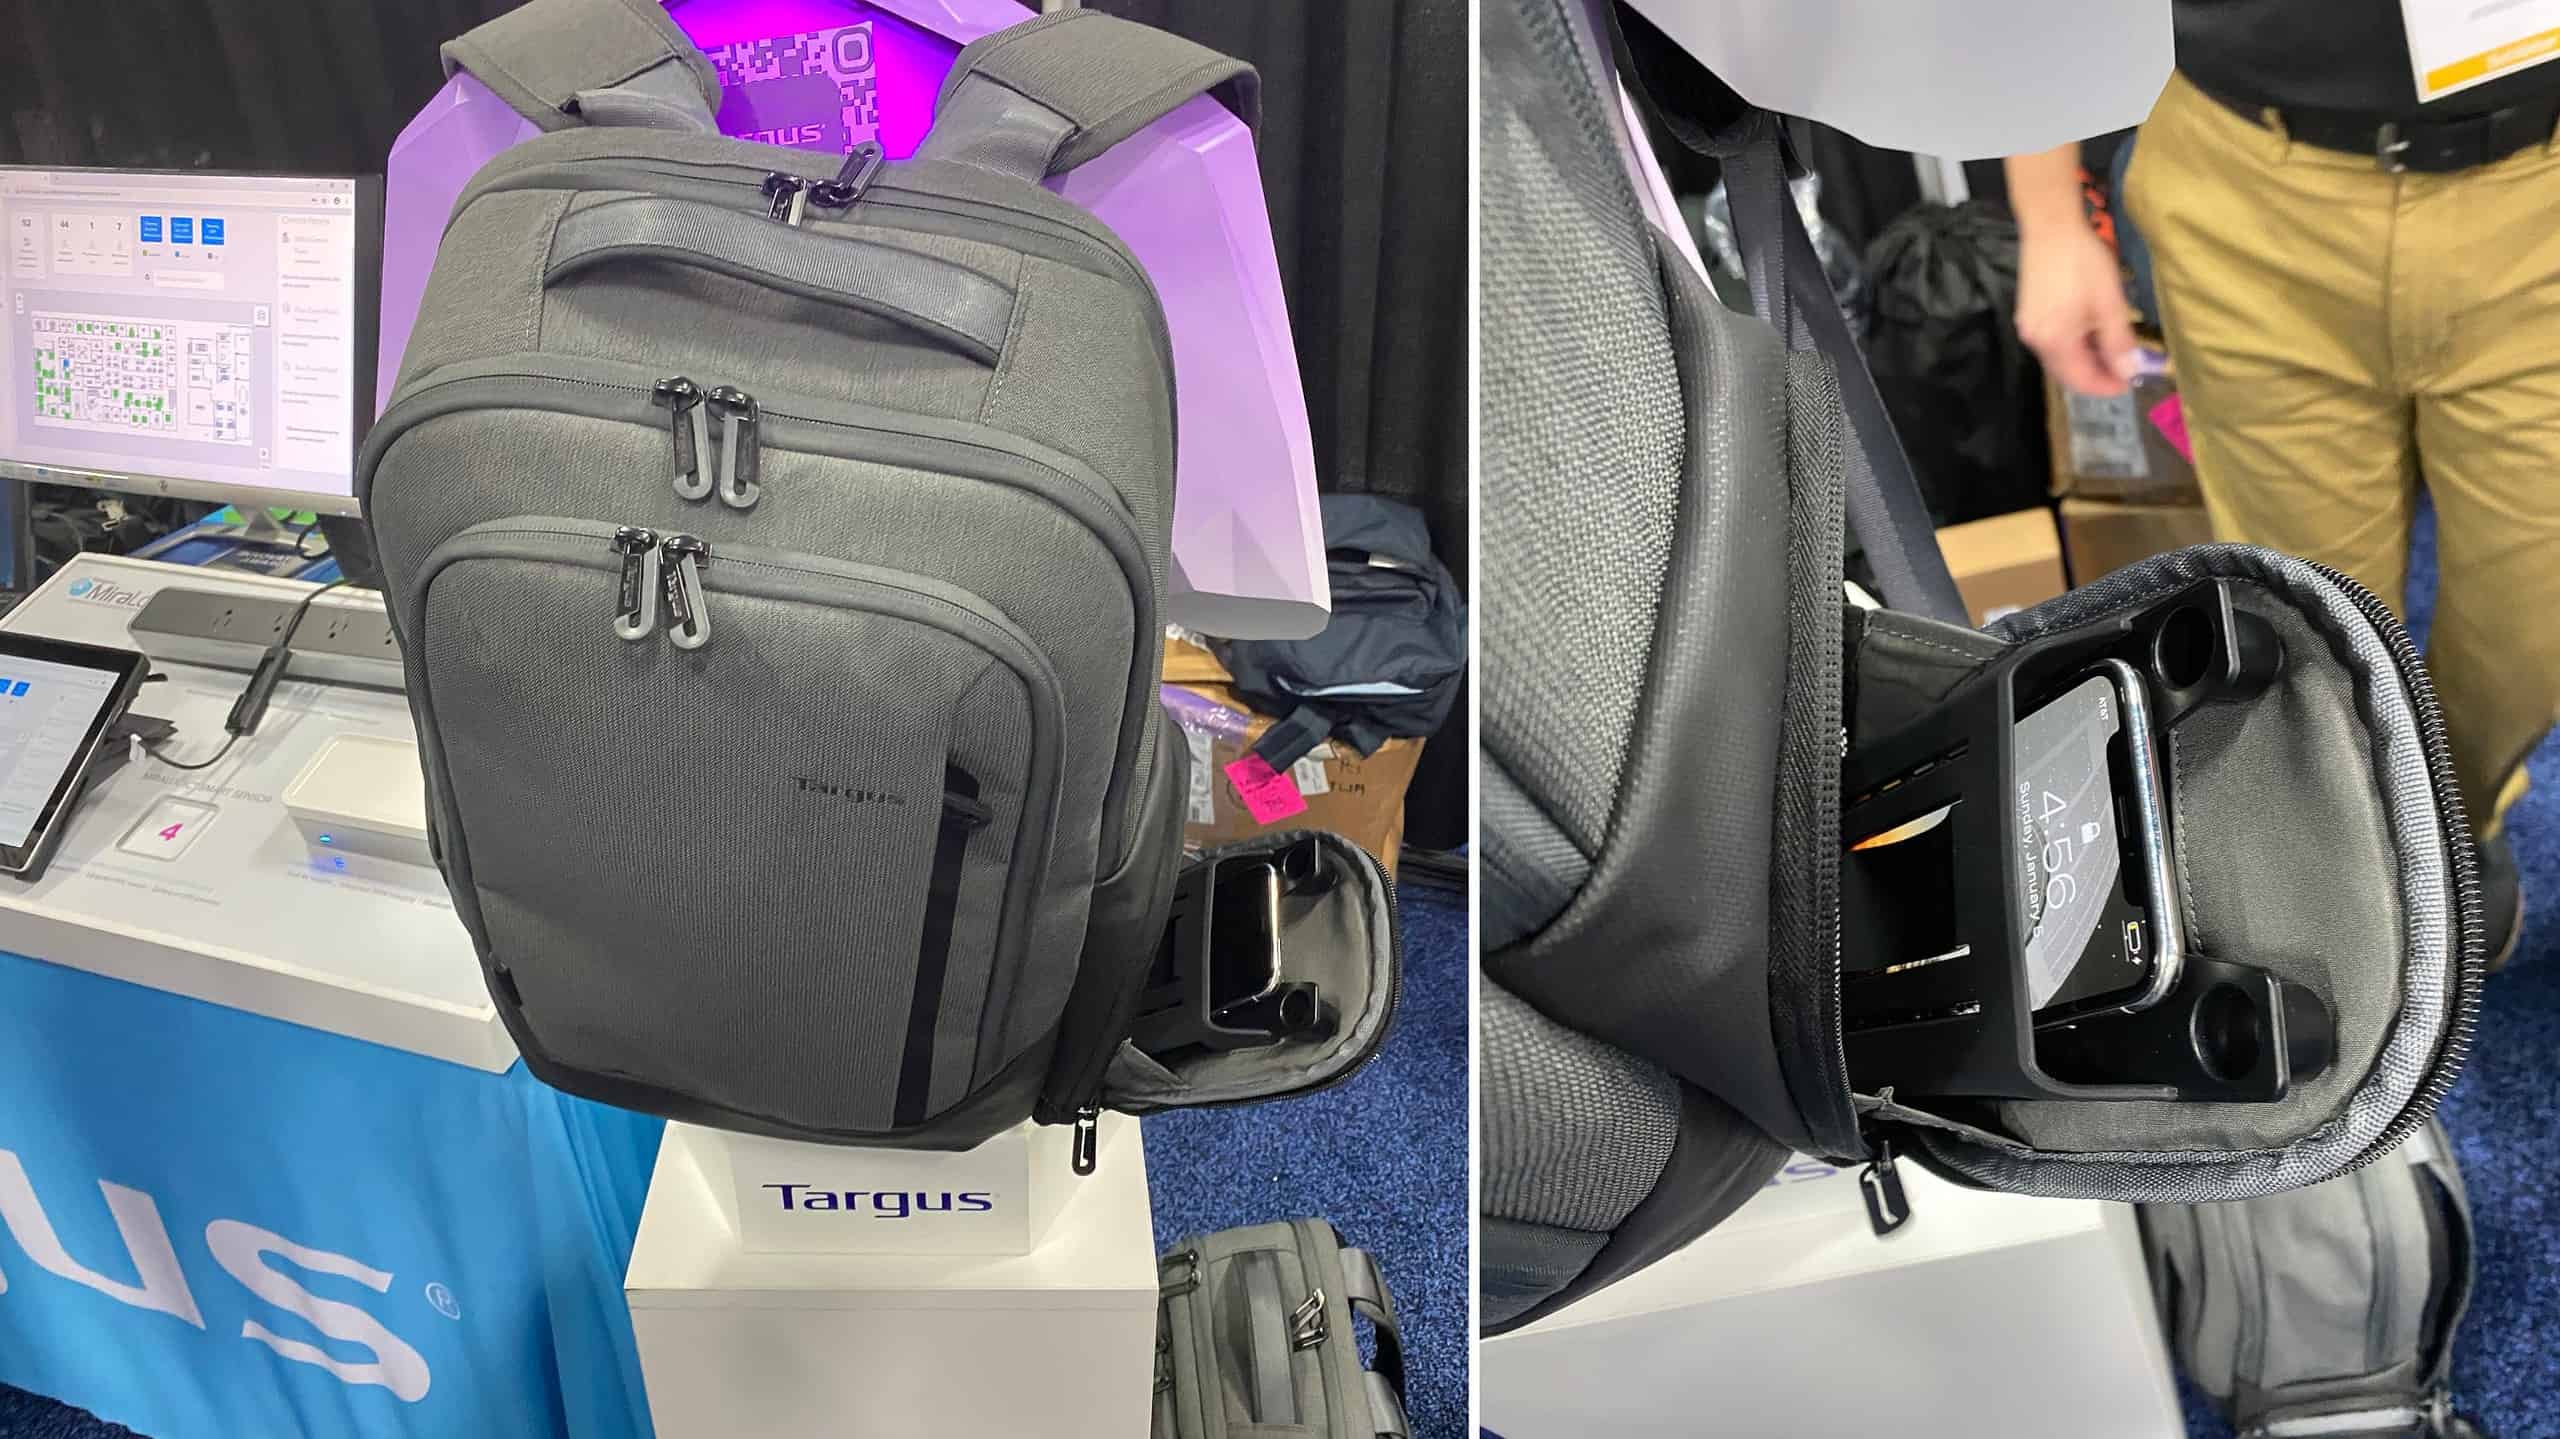 CES – Targus Adds Qi Charging to Cypress+ and Mobile ViP+ Bags